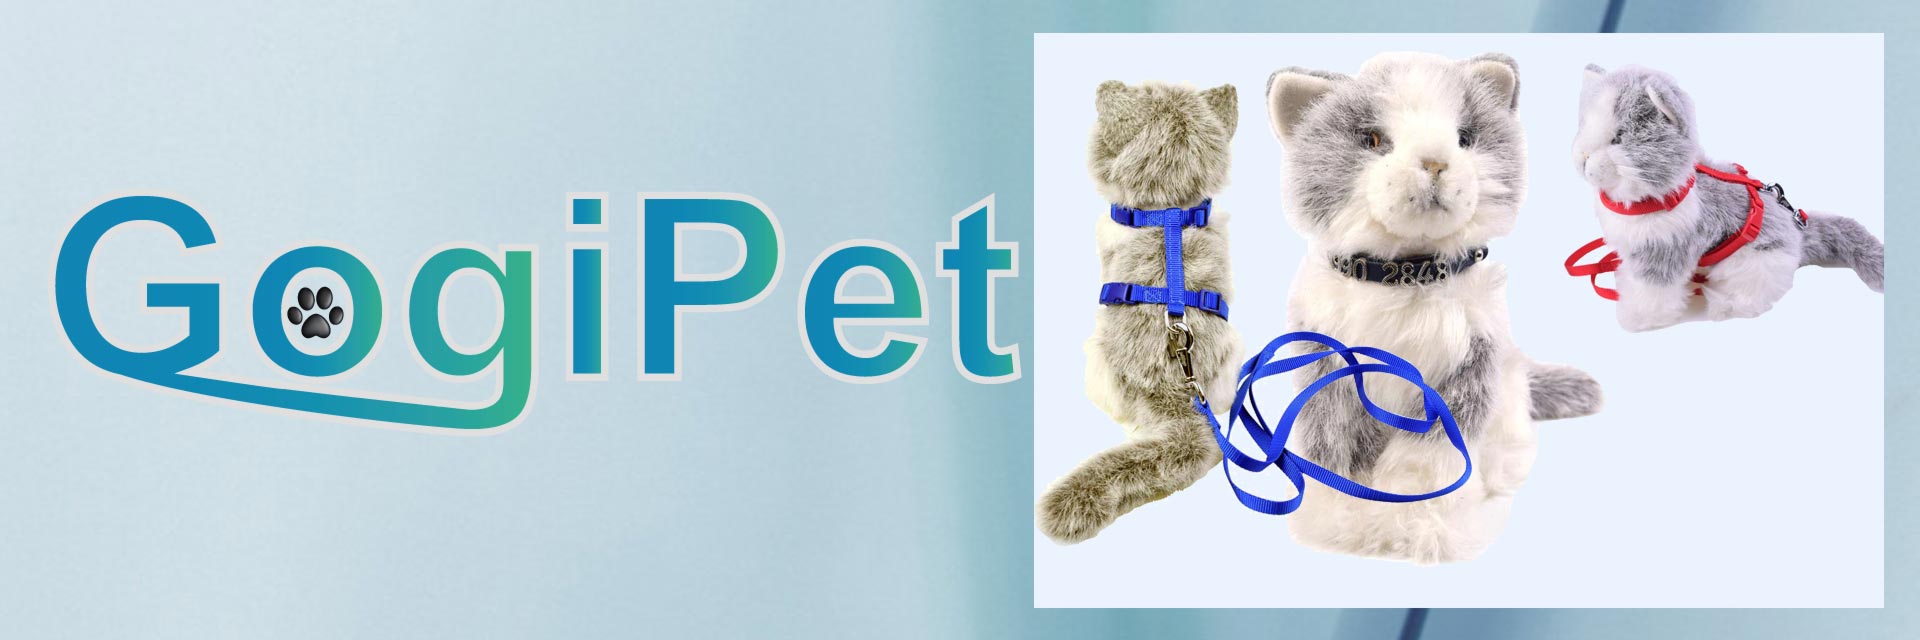 Harnesses for cats with cat leash